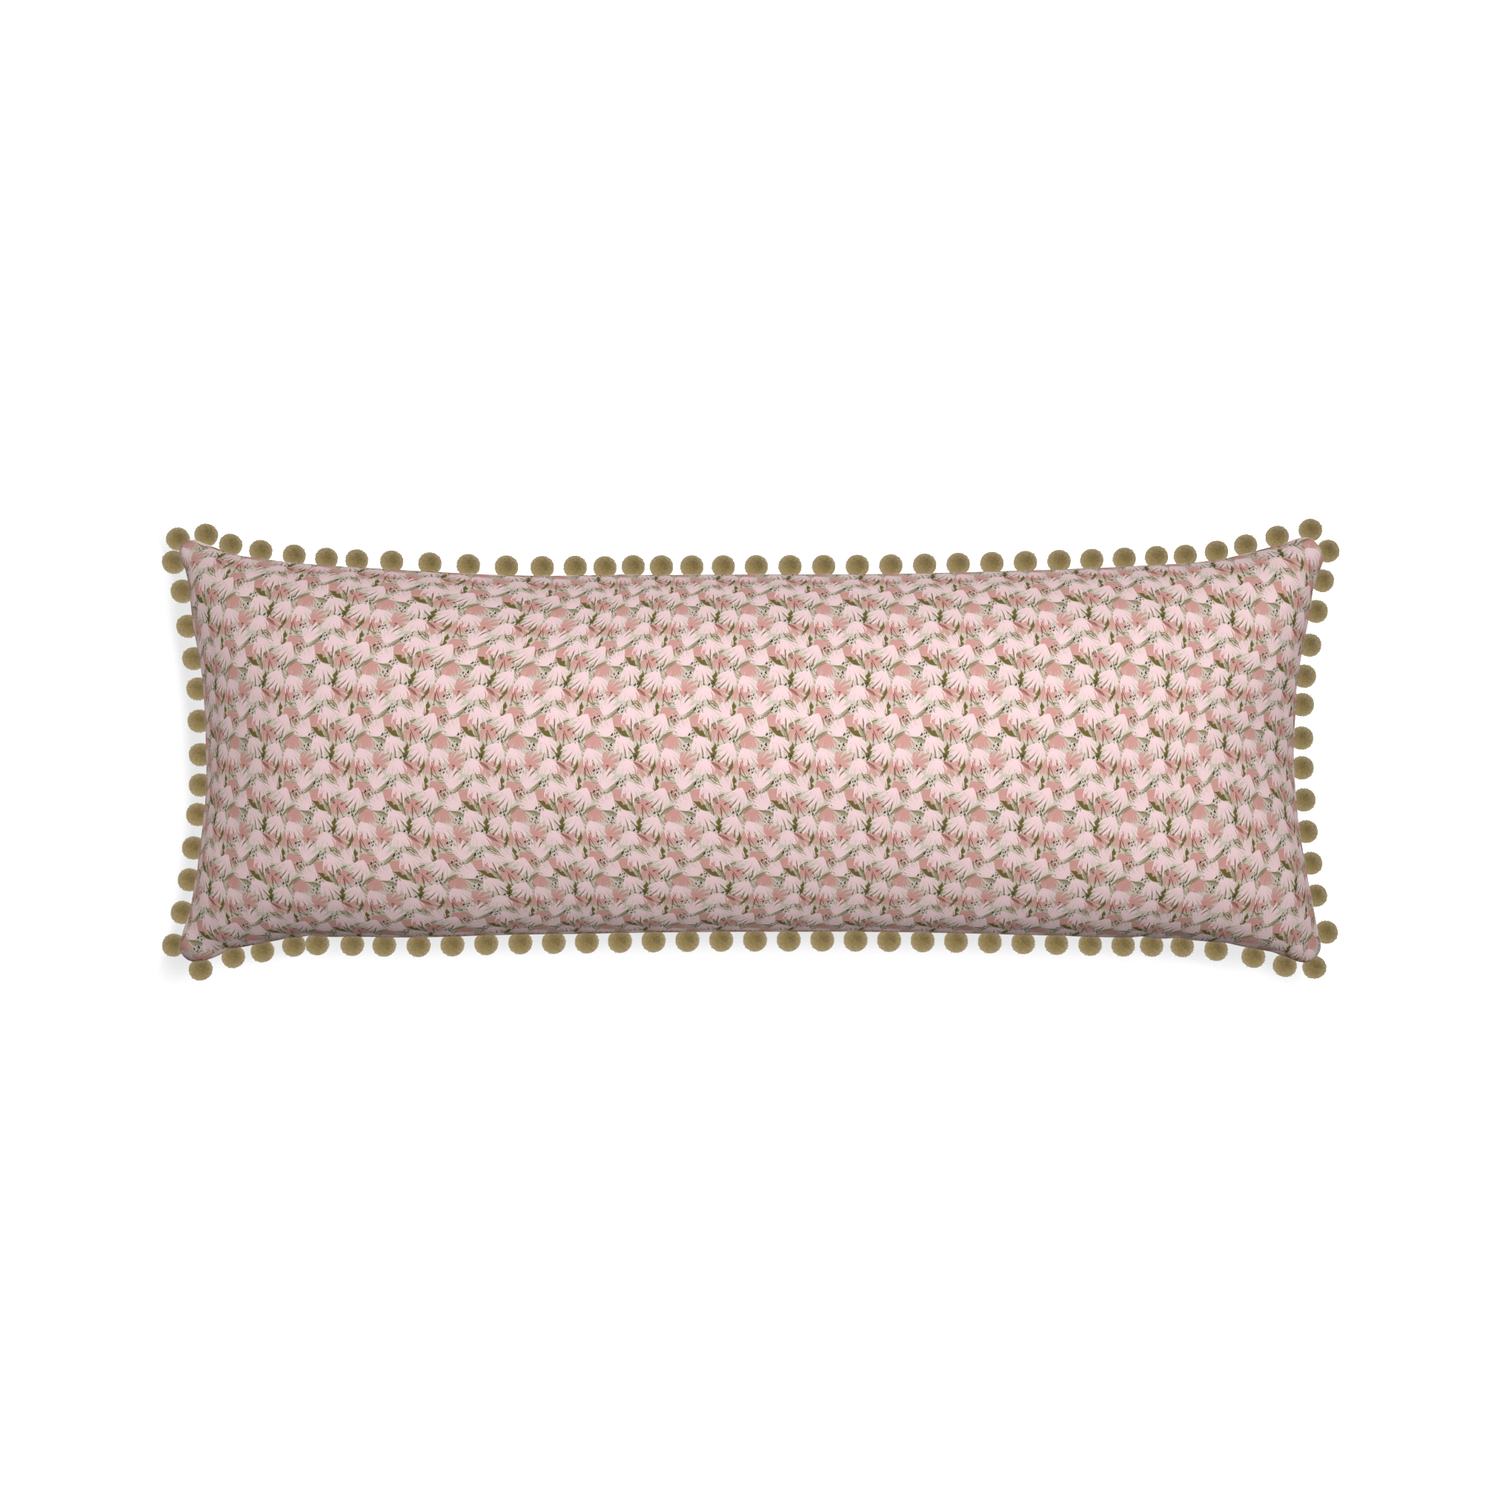 Xl-lumbar eden pink custom pillow with olive pom pom on white background